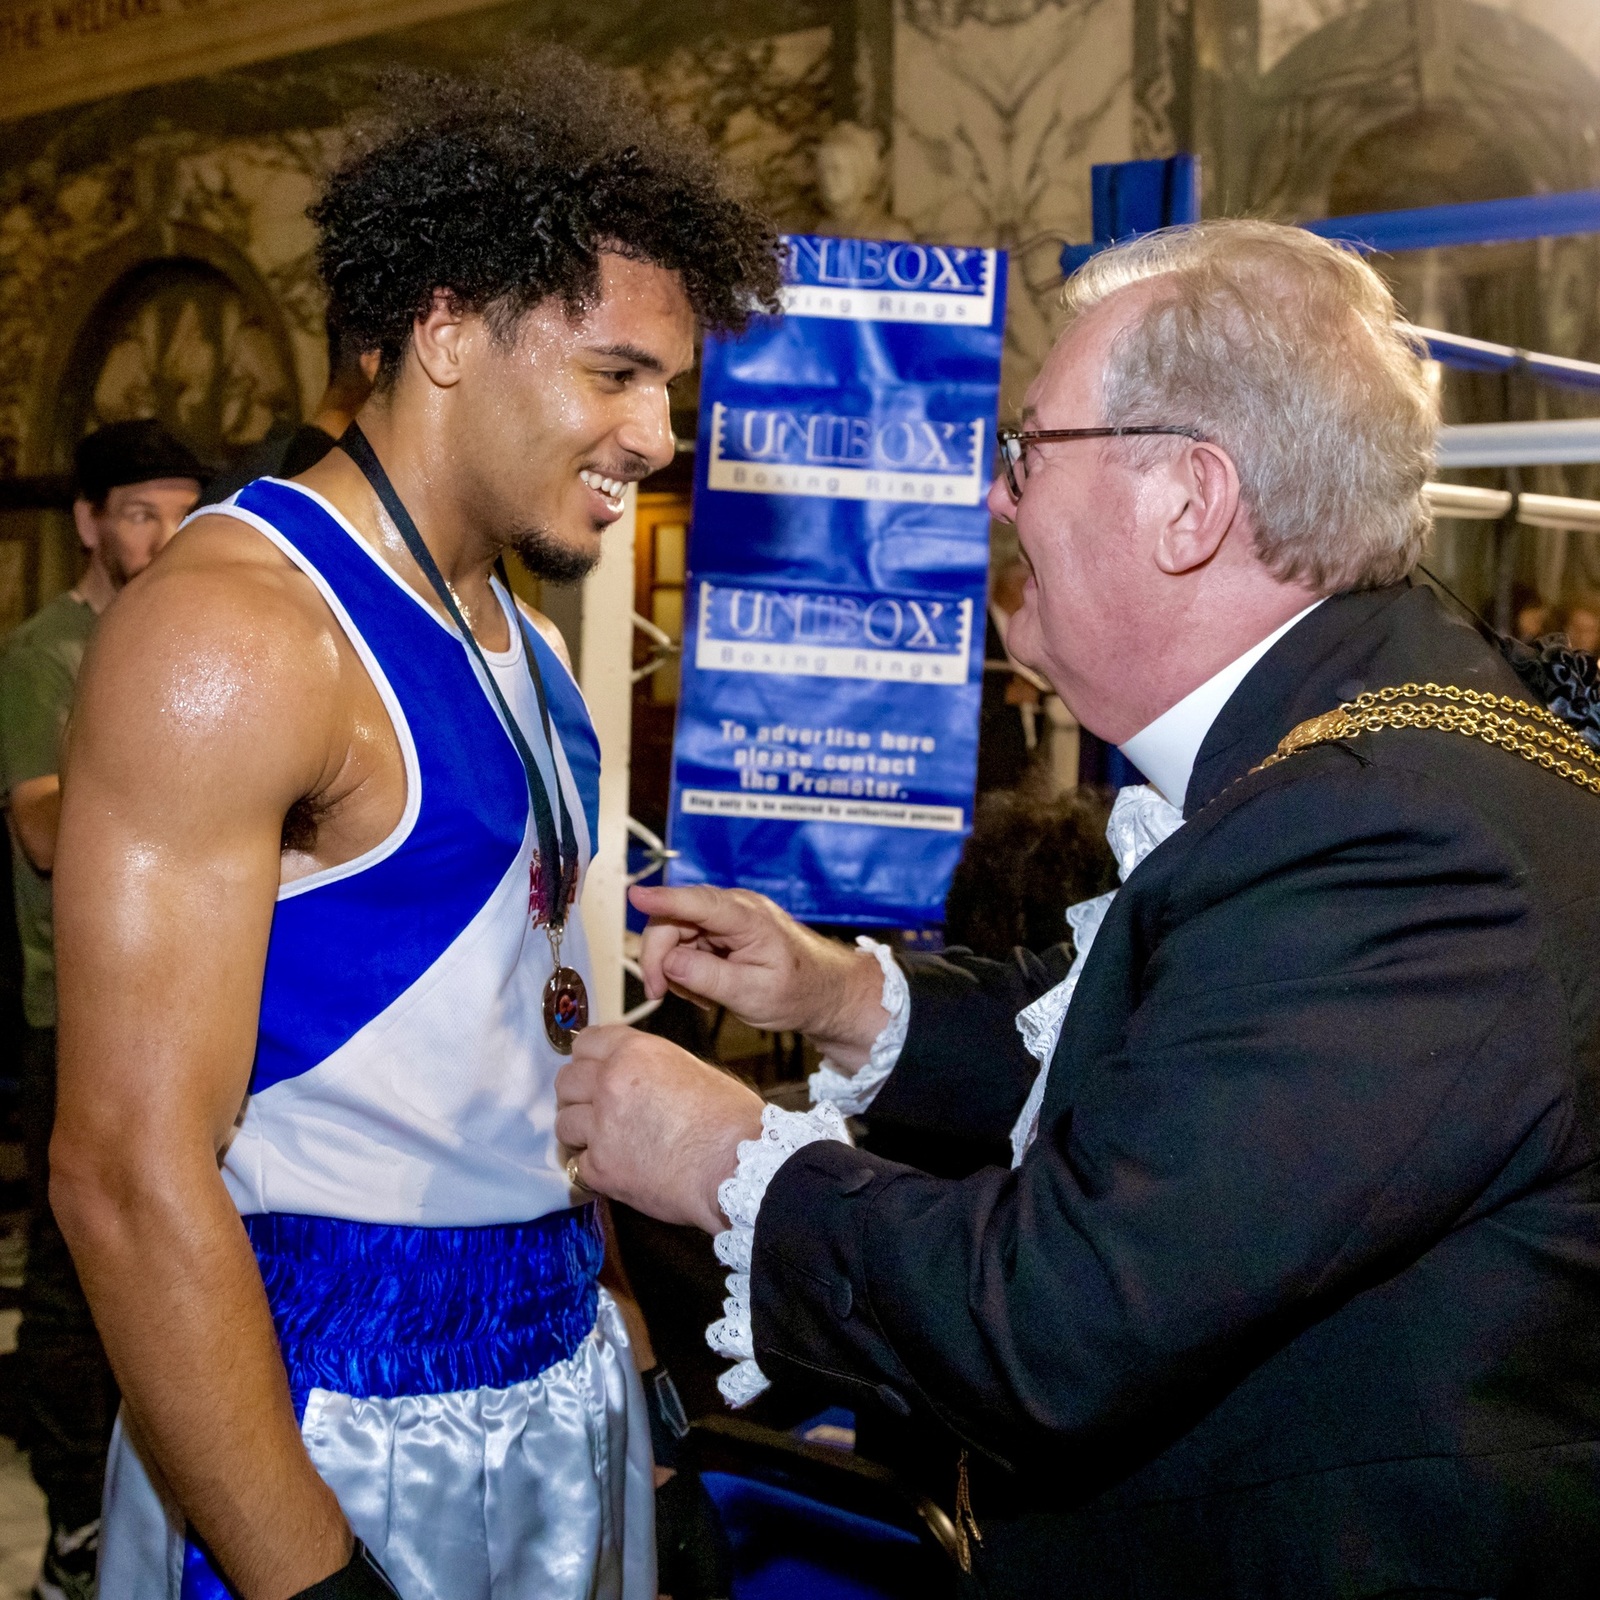 14 September 2023 - Presenting the medals at The Sheriff’s Last Stand Boxing Evening at the Old Bailey run in aid of The Sheriff’s and Recorder’s Fund…which featured Sheriff King!